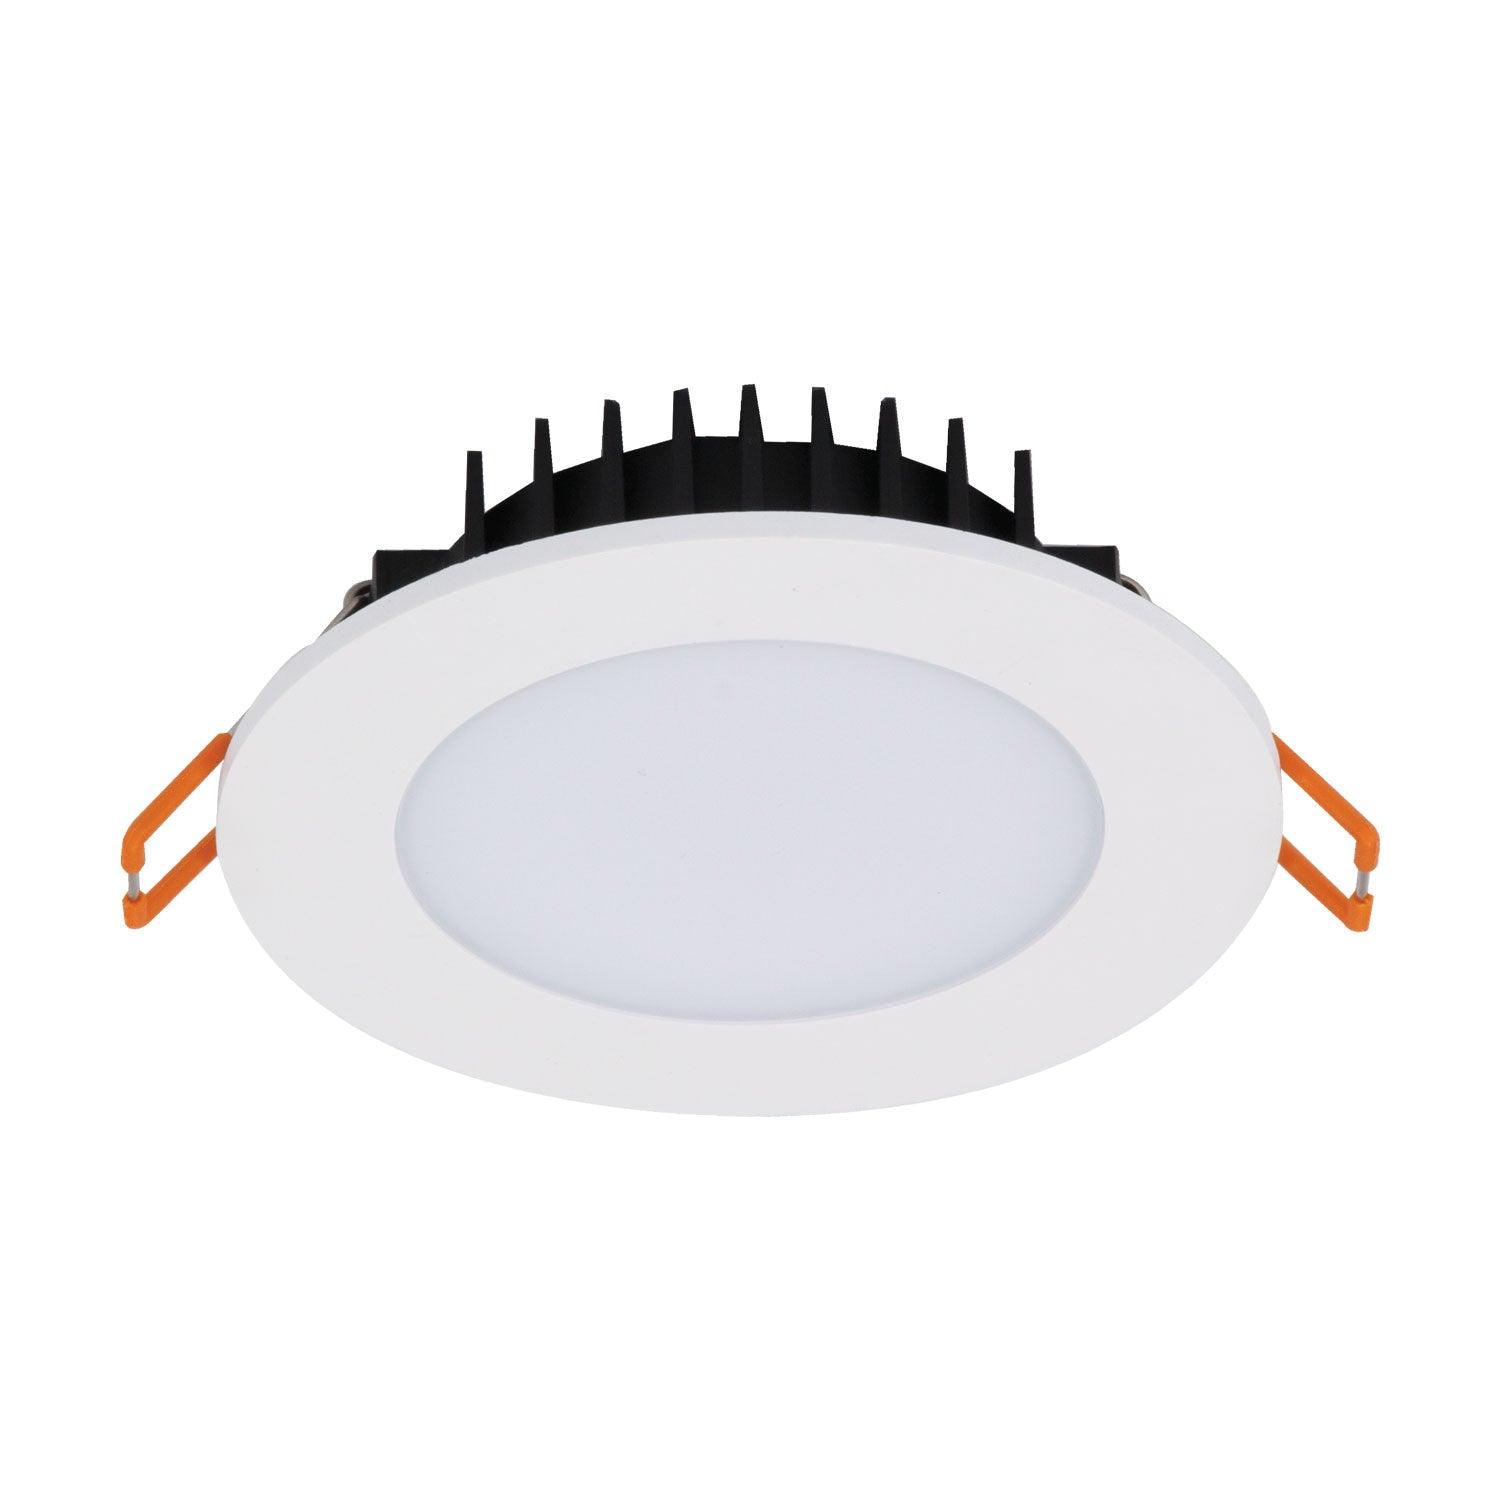 Domus Lighting LED Downlights WHITE Bliss-10 - 10W Colour Switchable Led Downlight Ip54 240V - Trio Lights-For-You 20706